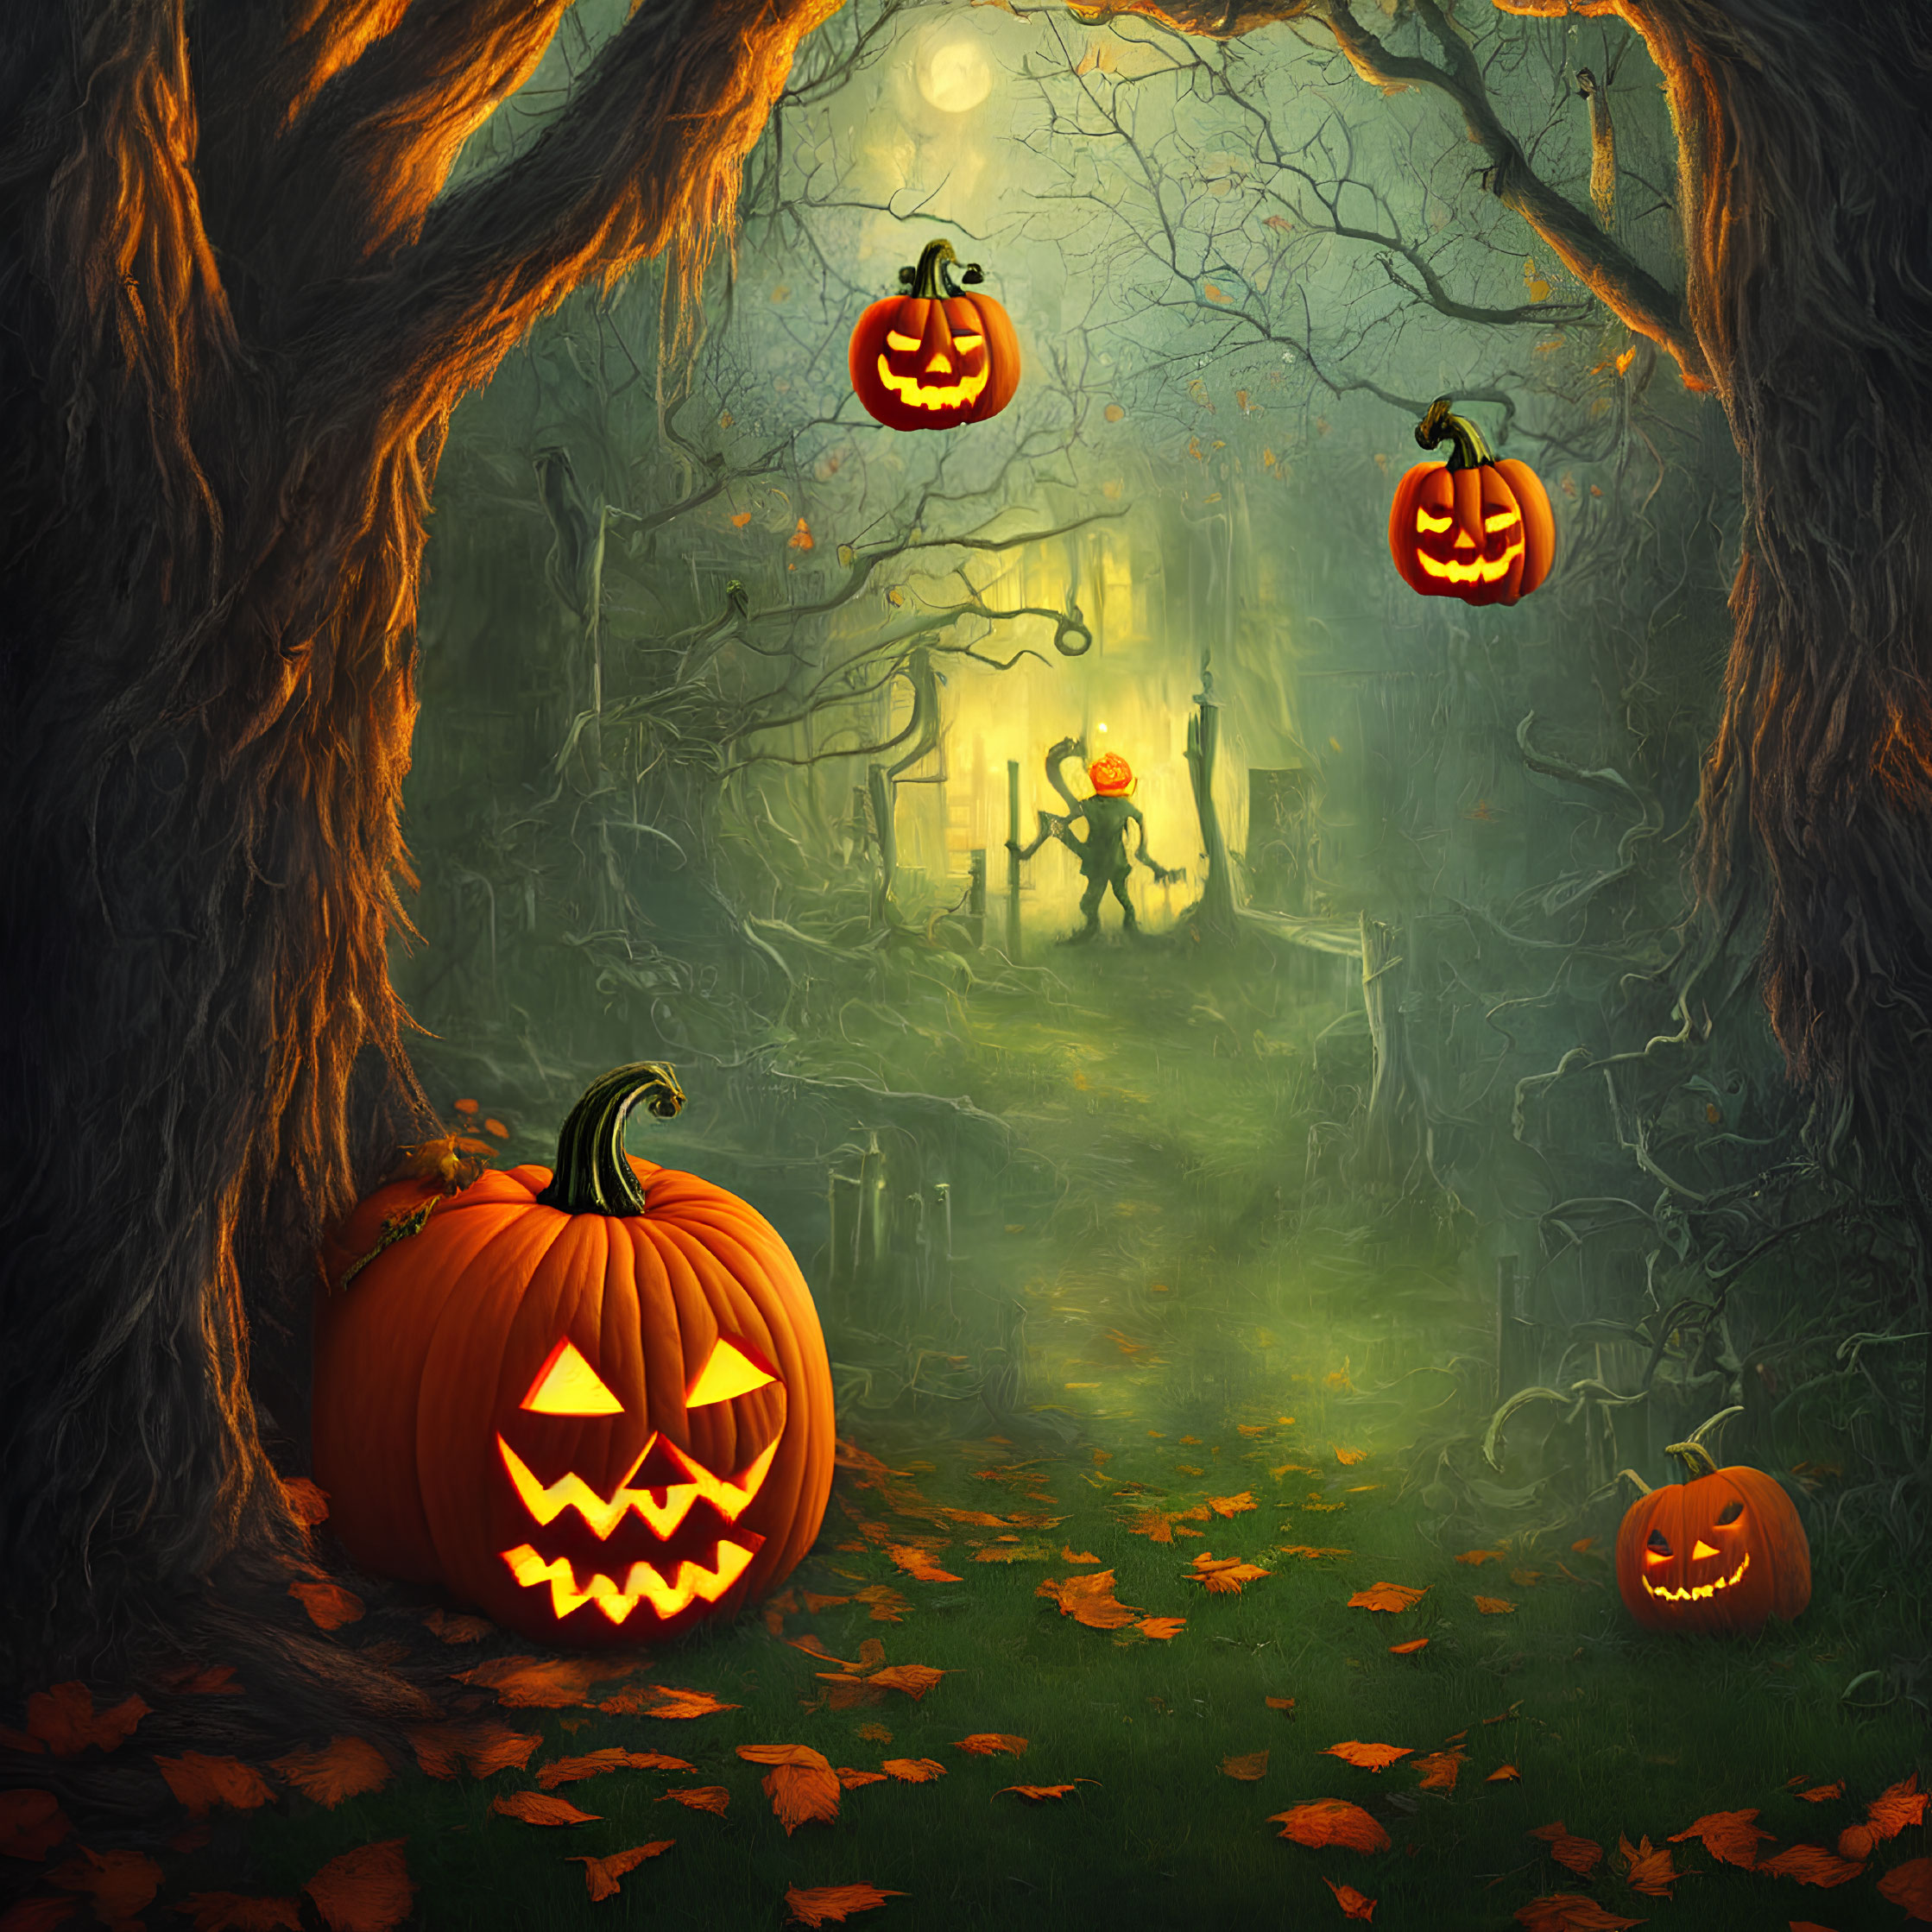 Eerie Halloween scene with carved pumpkins, full moon, and mysterious figure